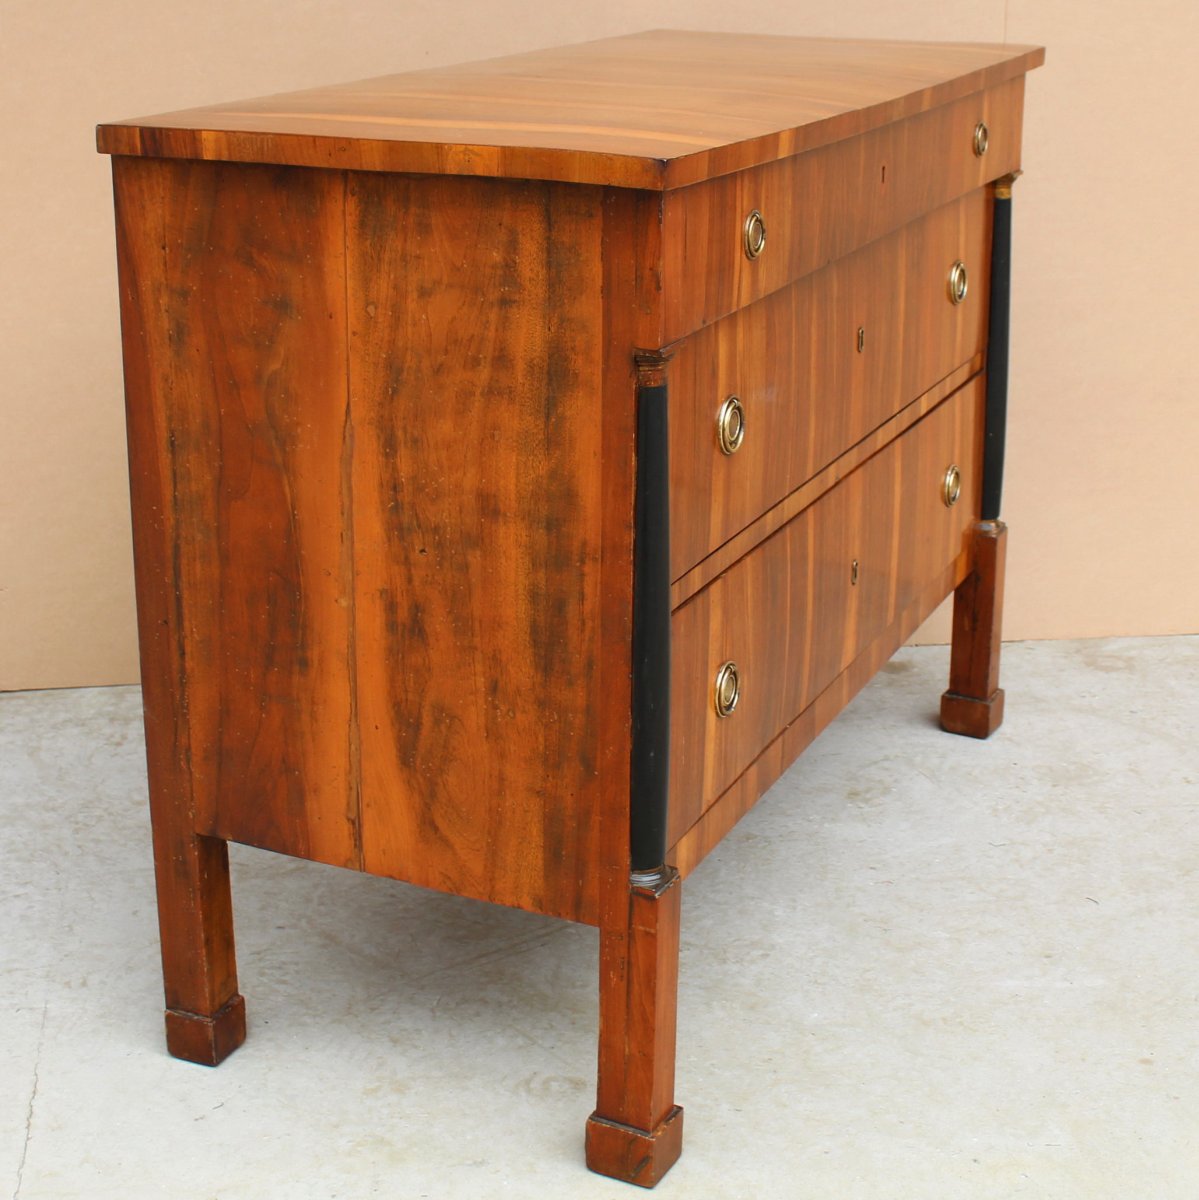 Antique Empire Dresser Commode Chest Of Drawers In Walnut - Italy 19th Century-photo-4